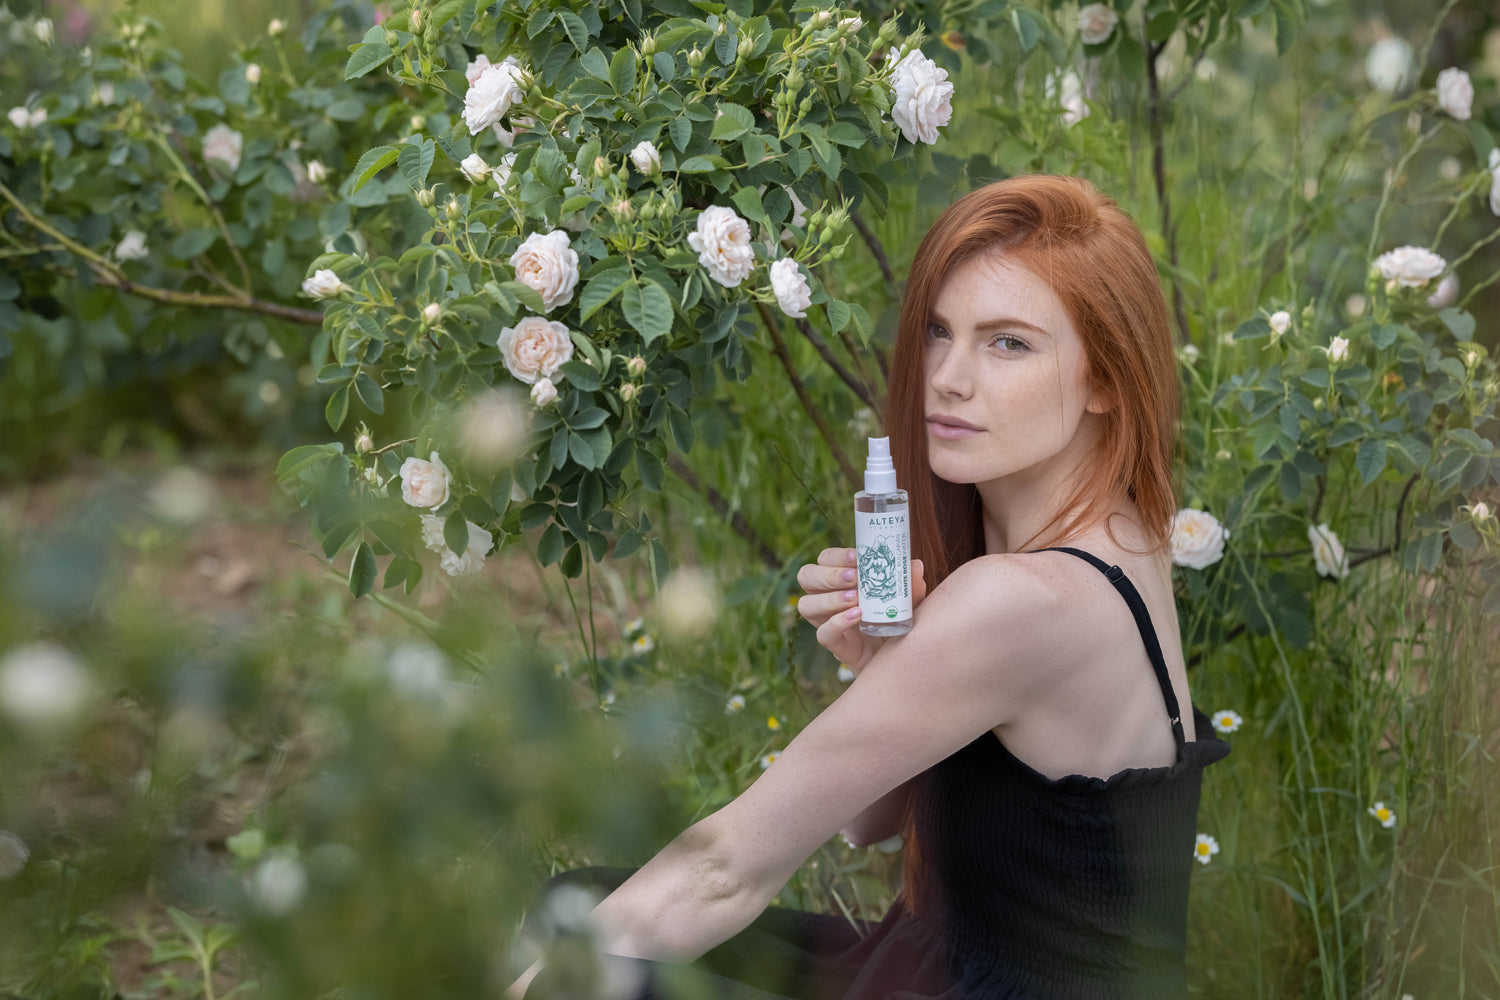 A woman with red hair sitting in a field with roses.